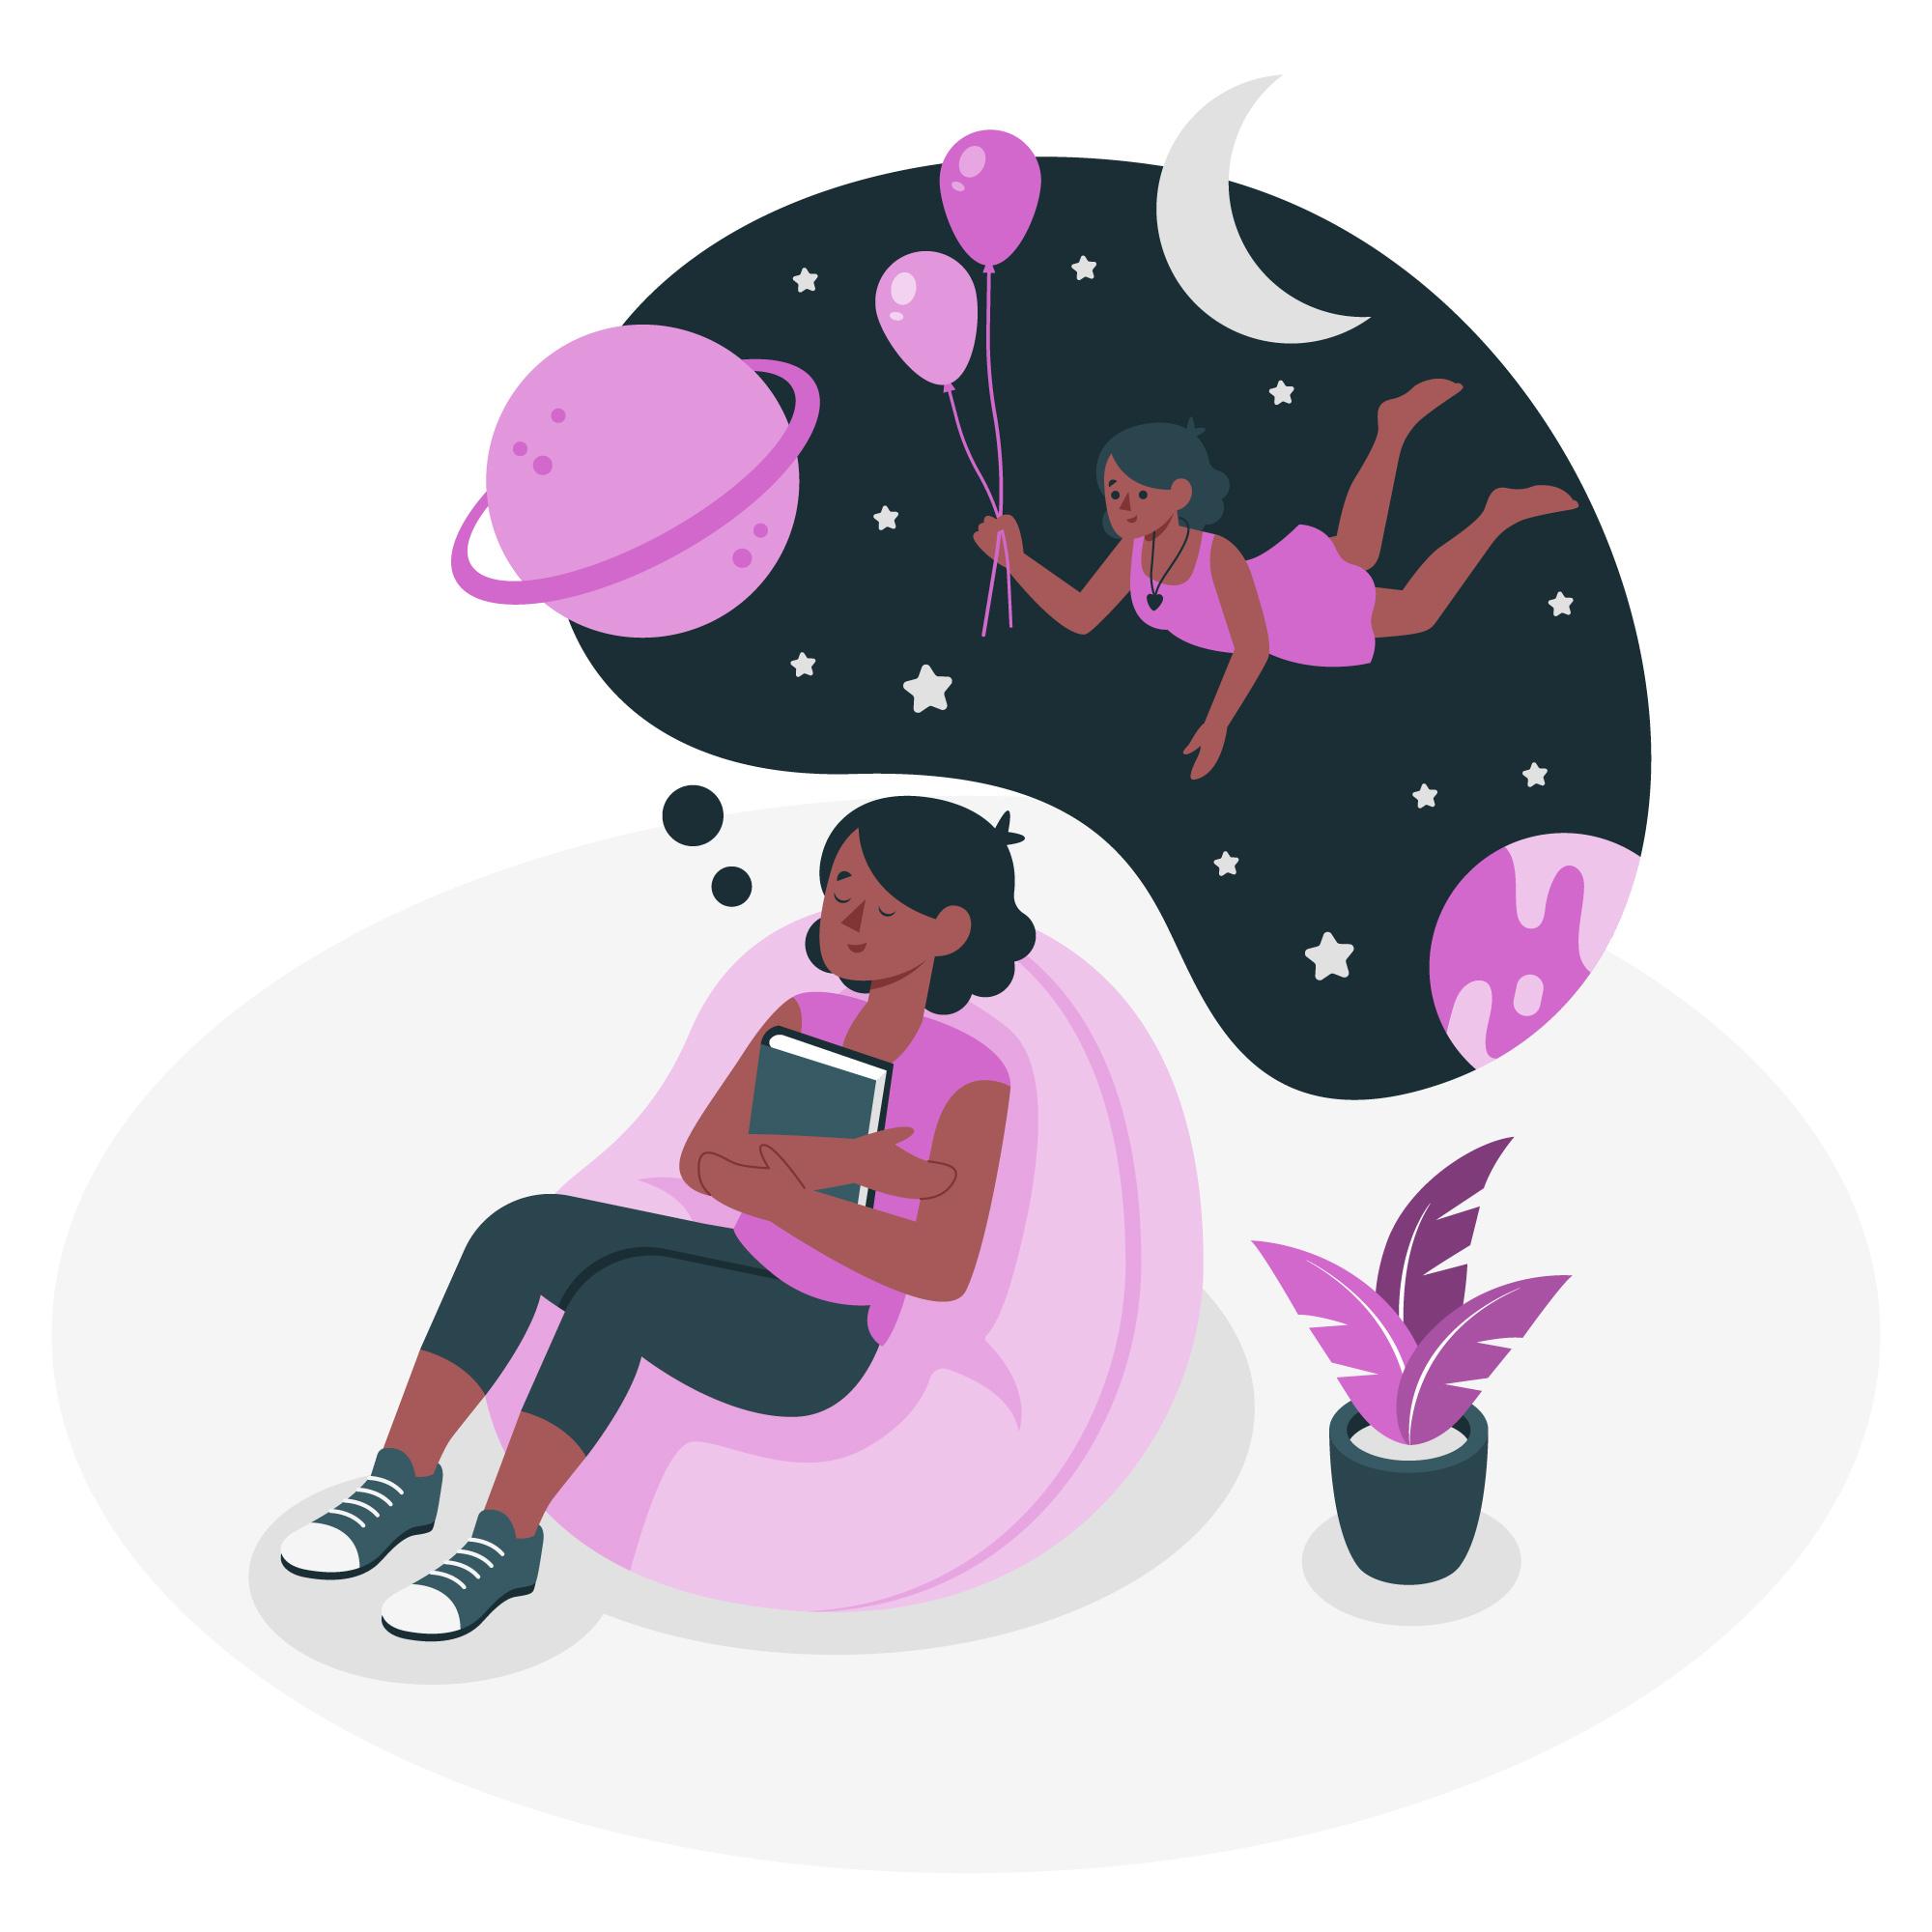 A woman sits in a beanbag chair holding a book and dreaming of flying through space holding 2 balloons